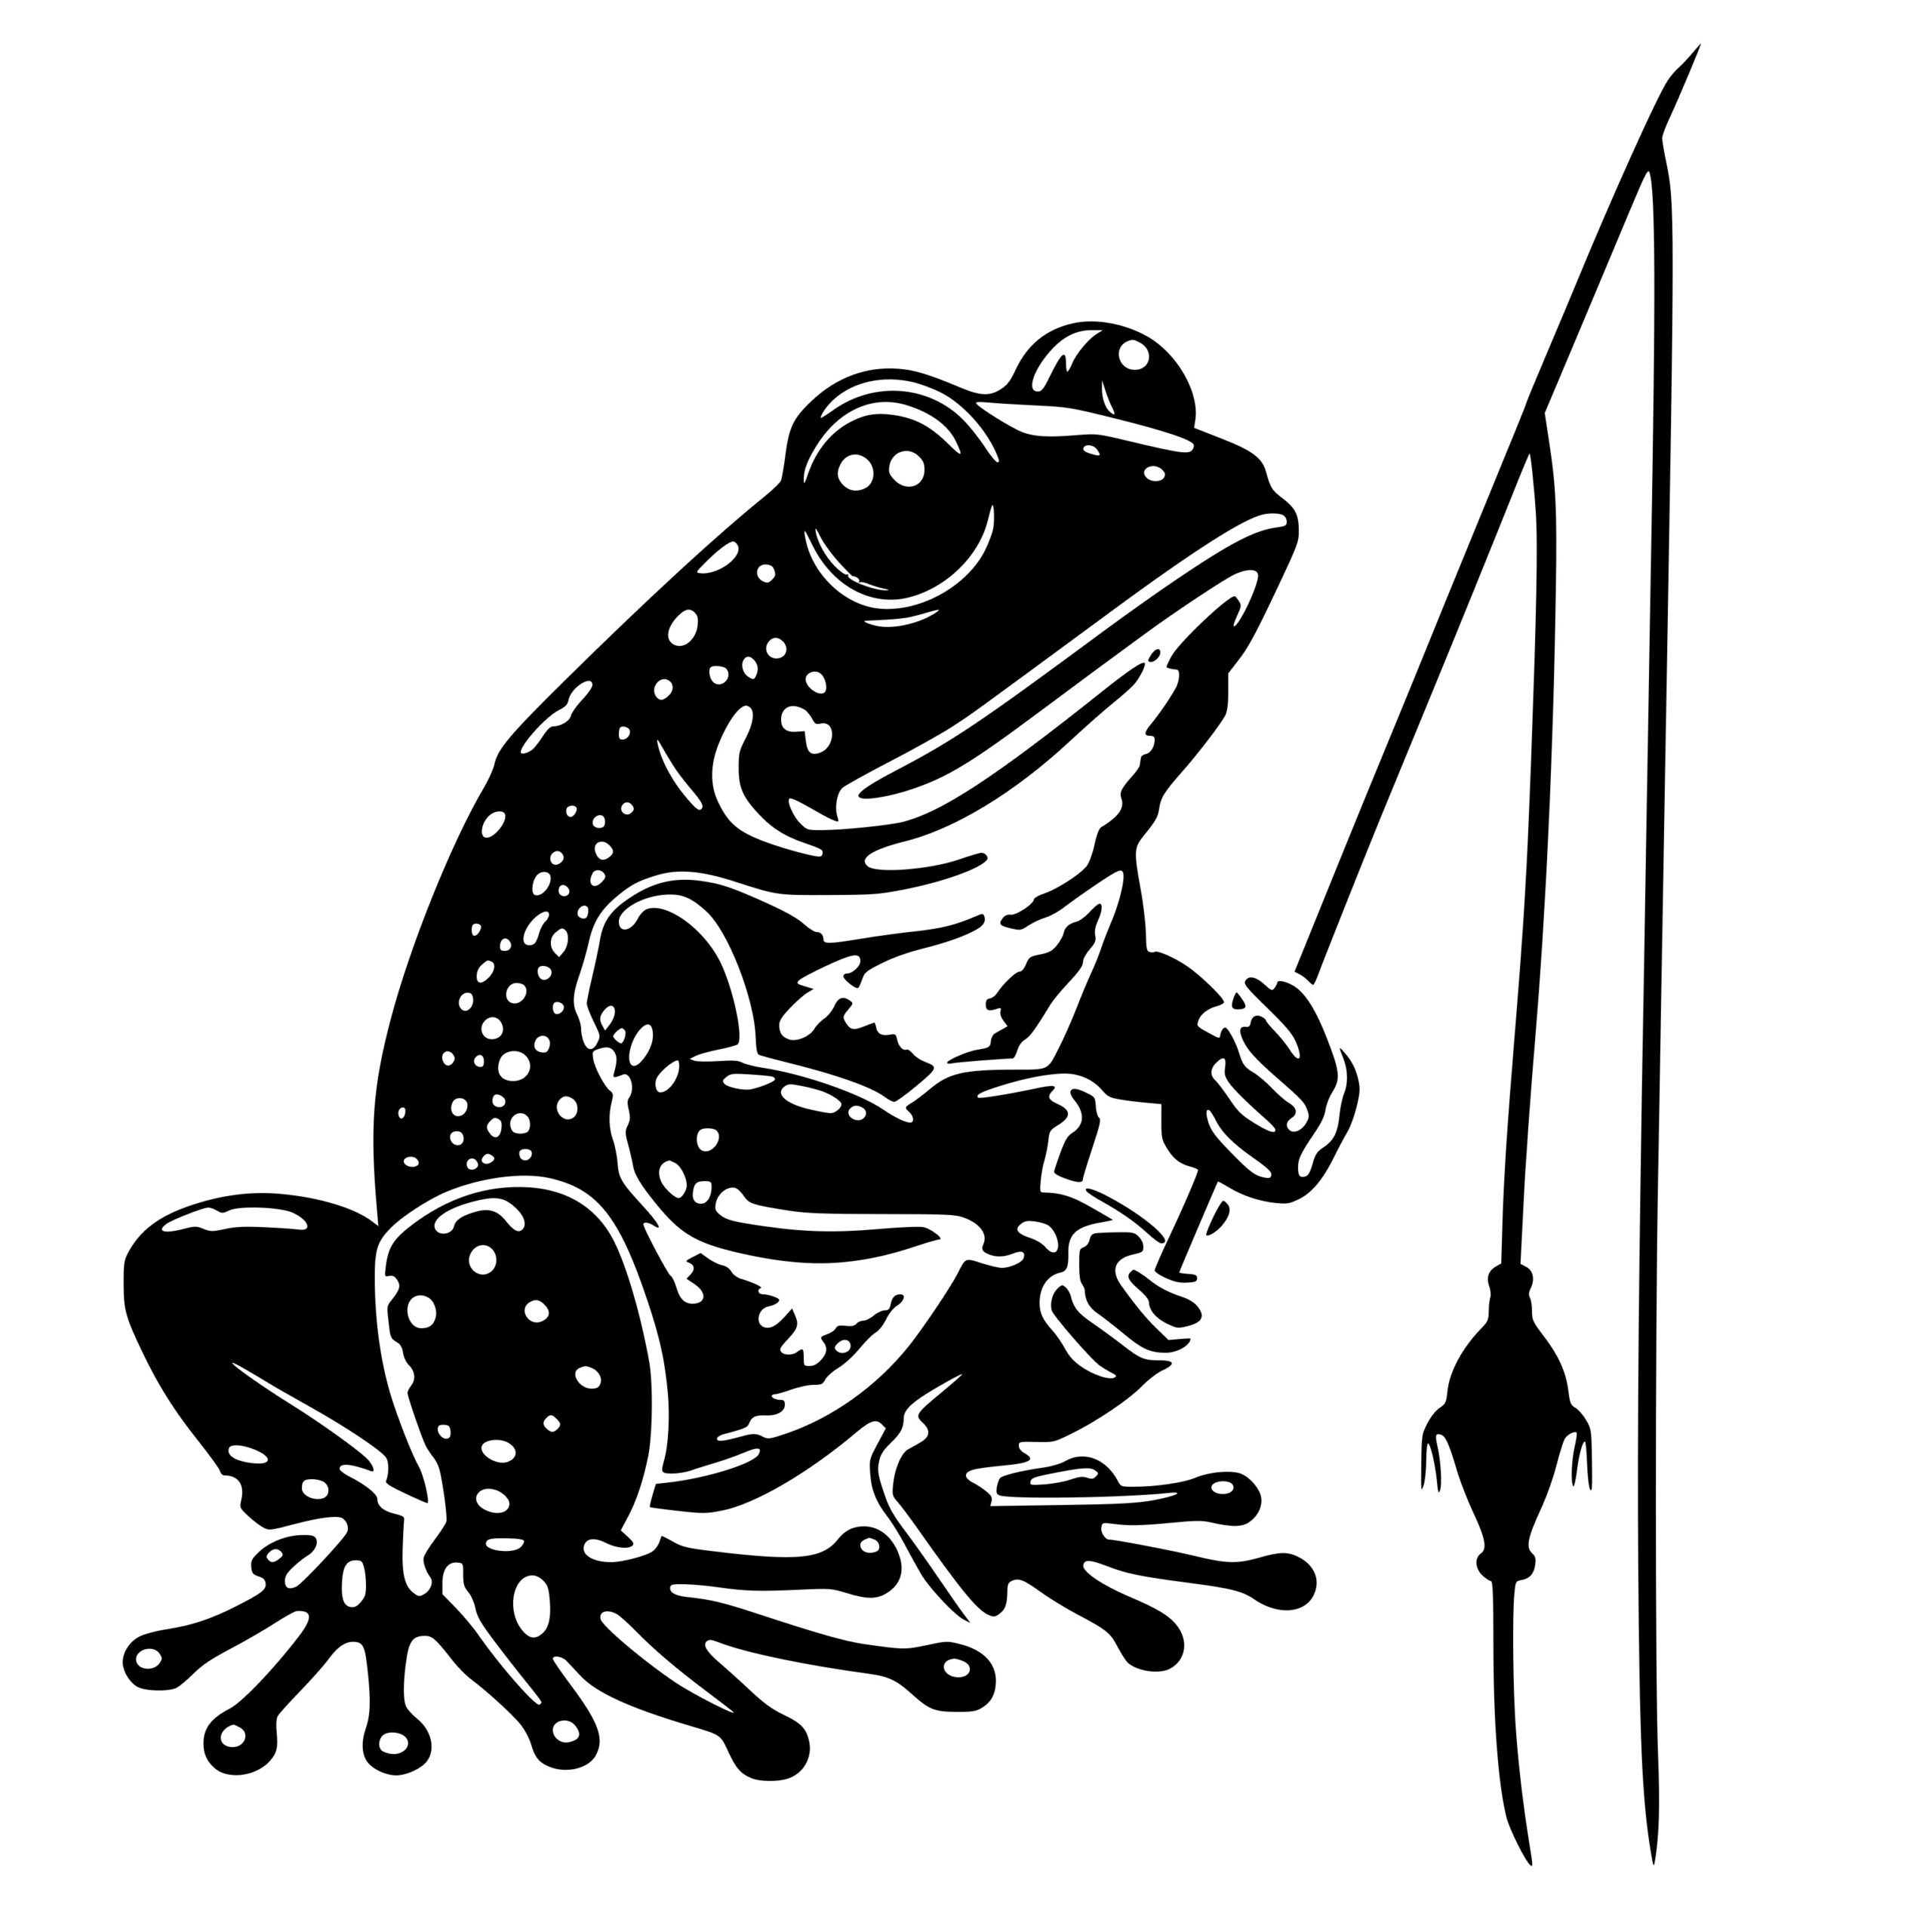 Frog Holding Fishing Rod SVG File for Cricut, Silhouette, Laser